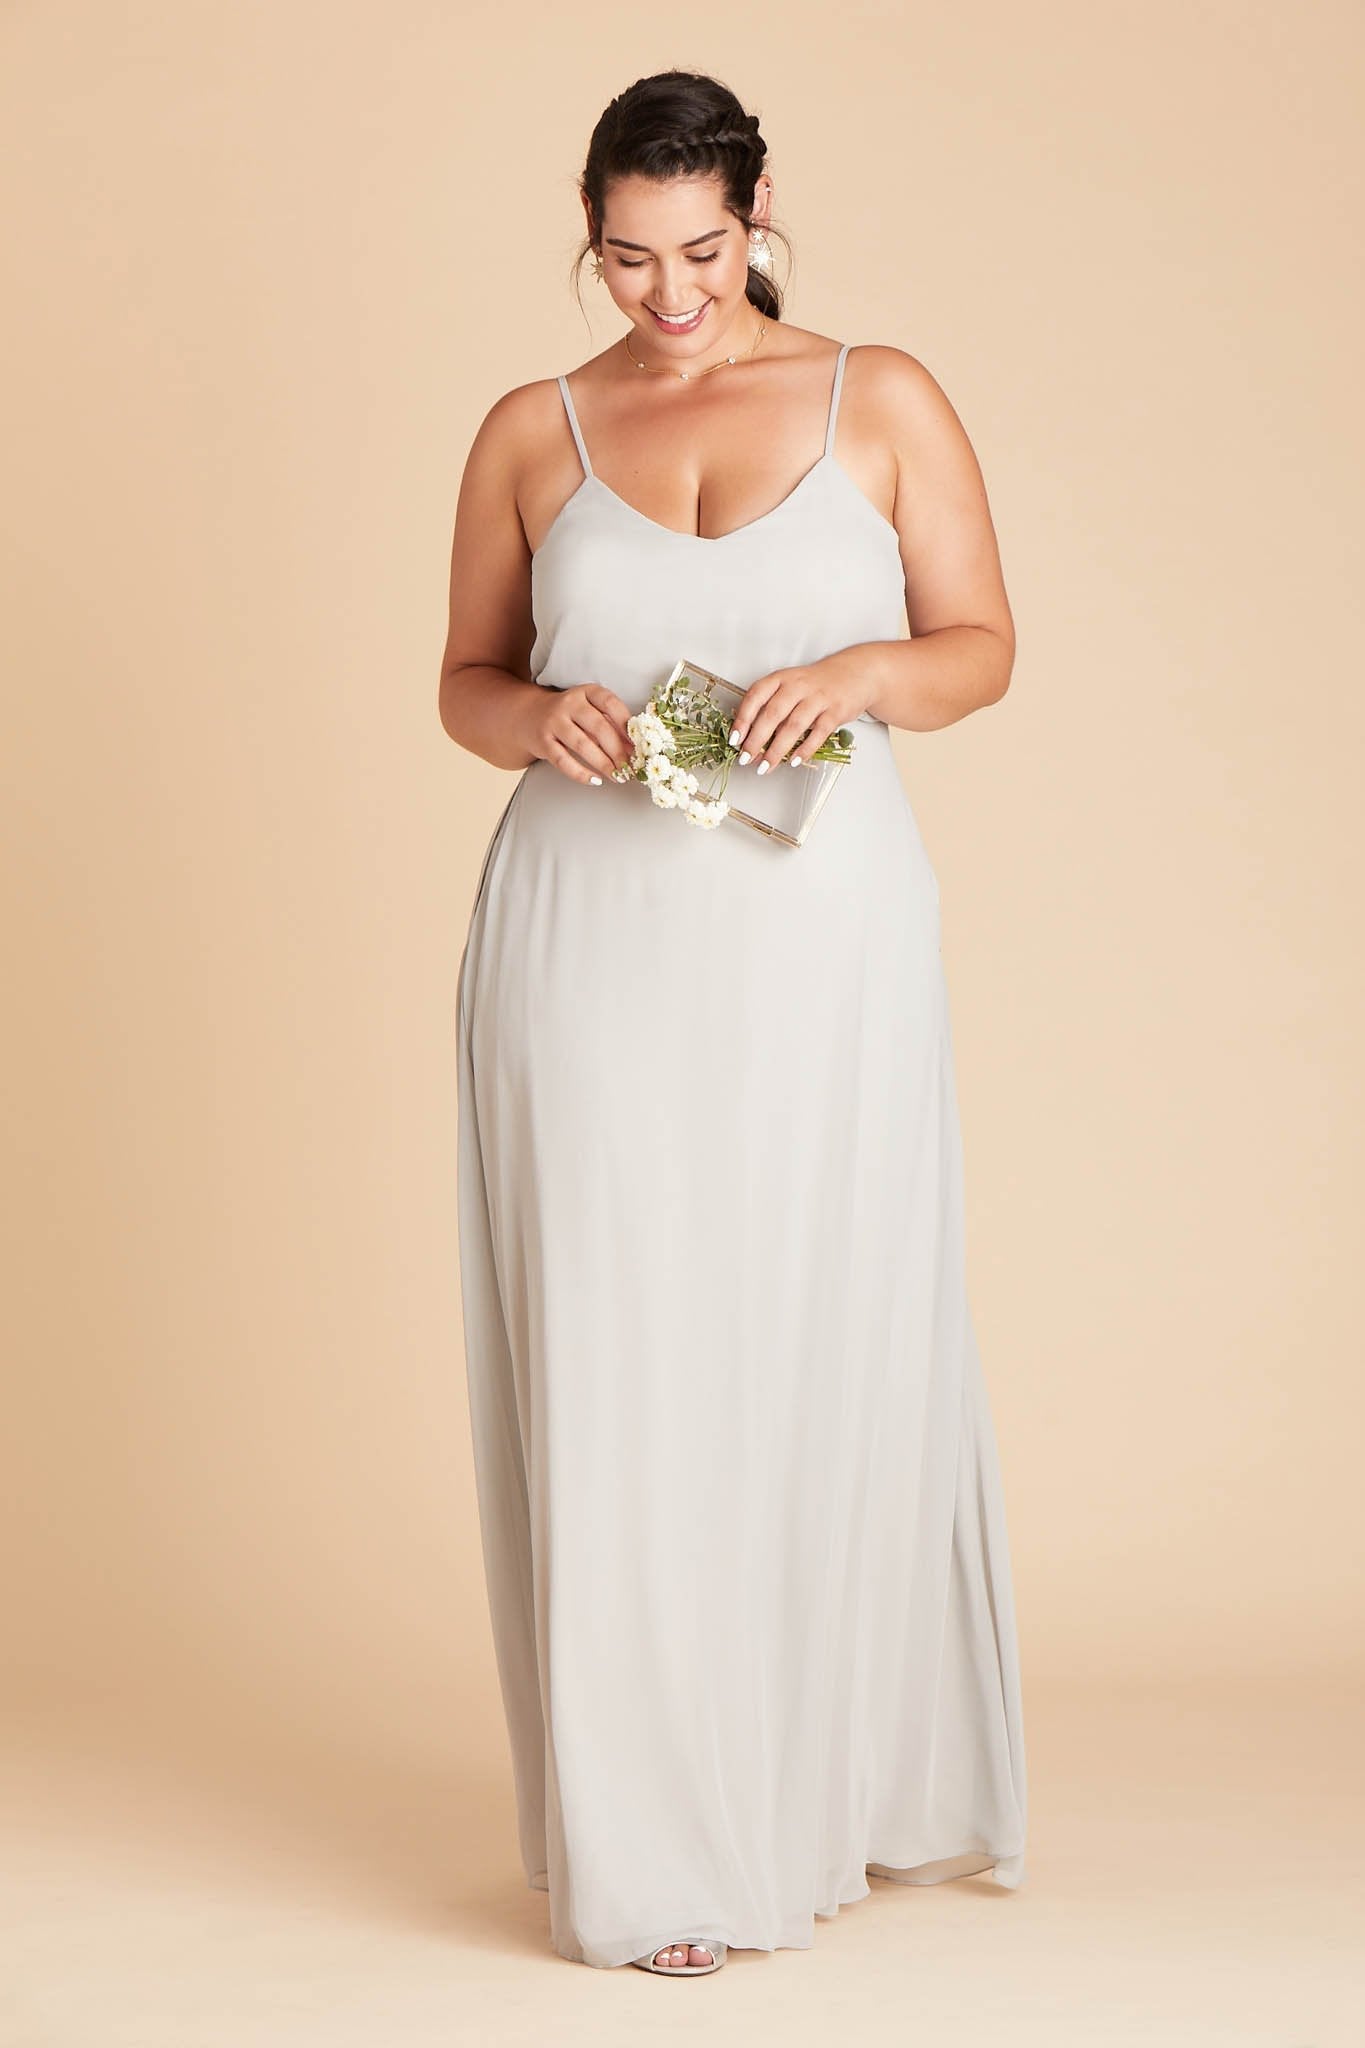 Gwennie plus size bridesmaid dress in dove gray chiffon by Birdy Grey, front view